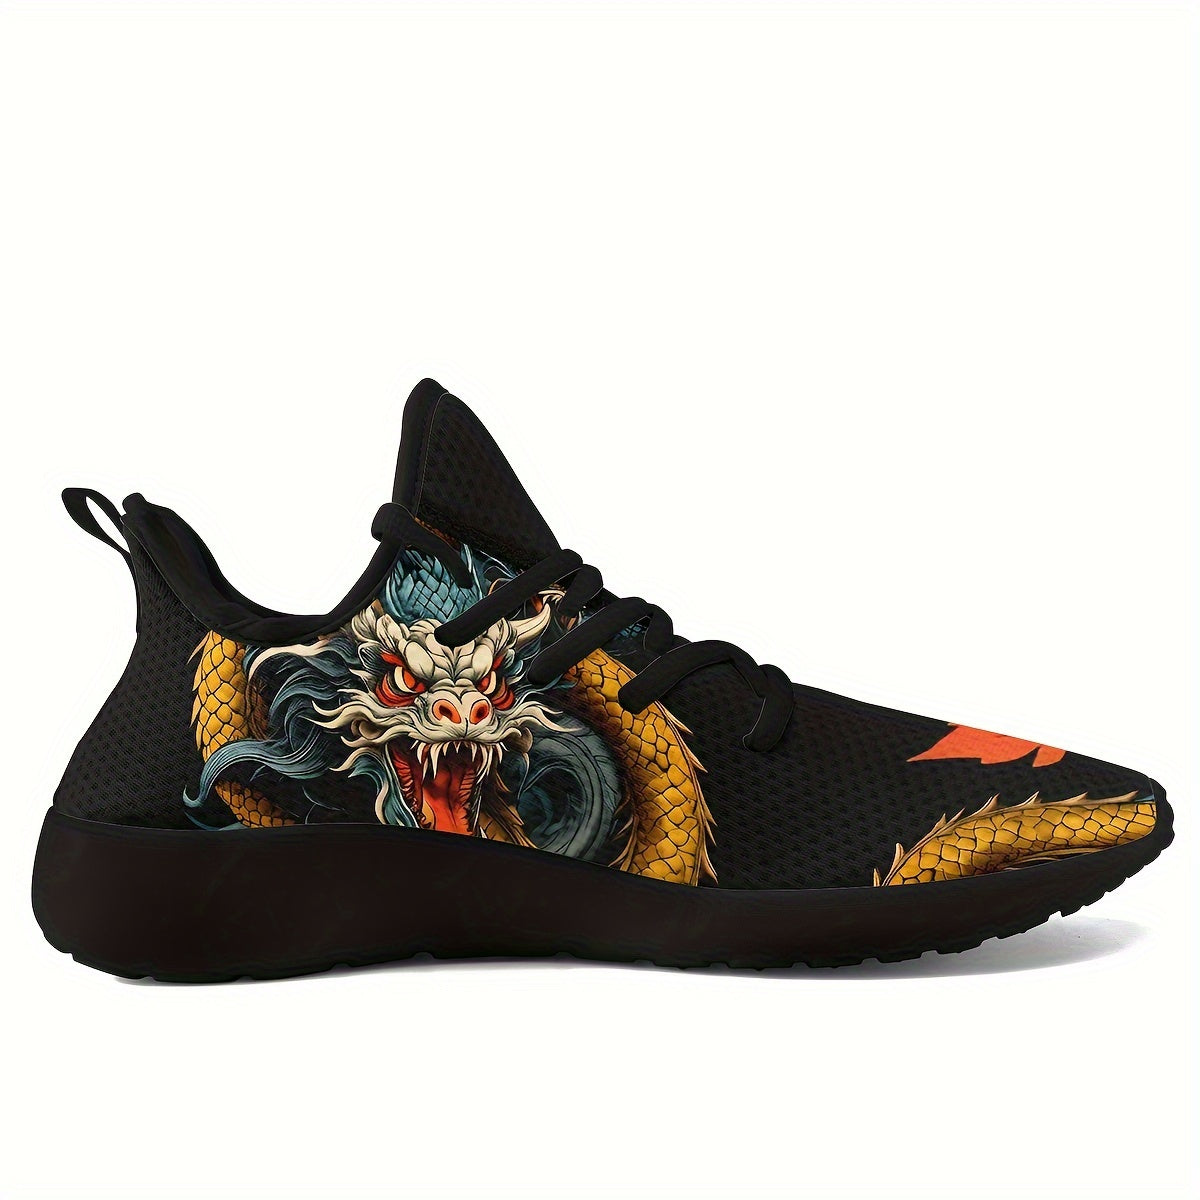 Men's Chinese Dragon Graphic Design Knit Breathable Running Shoes, Comfy Soft Sole Shock Absorption Lace Up Sneakers